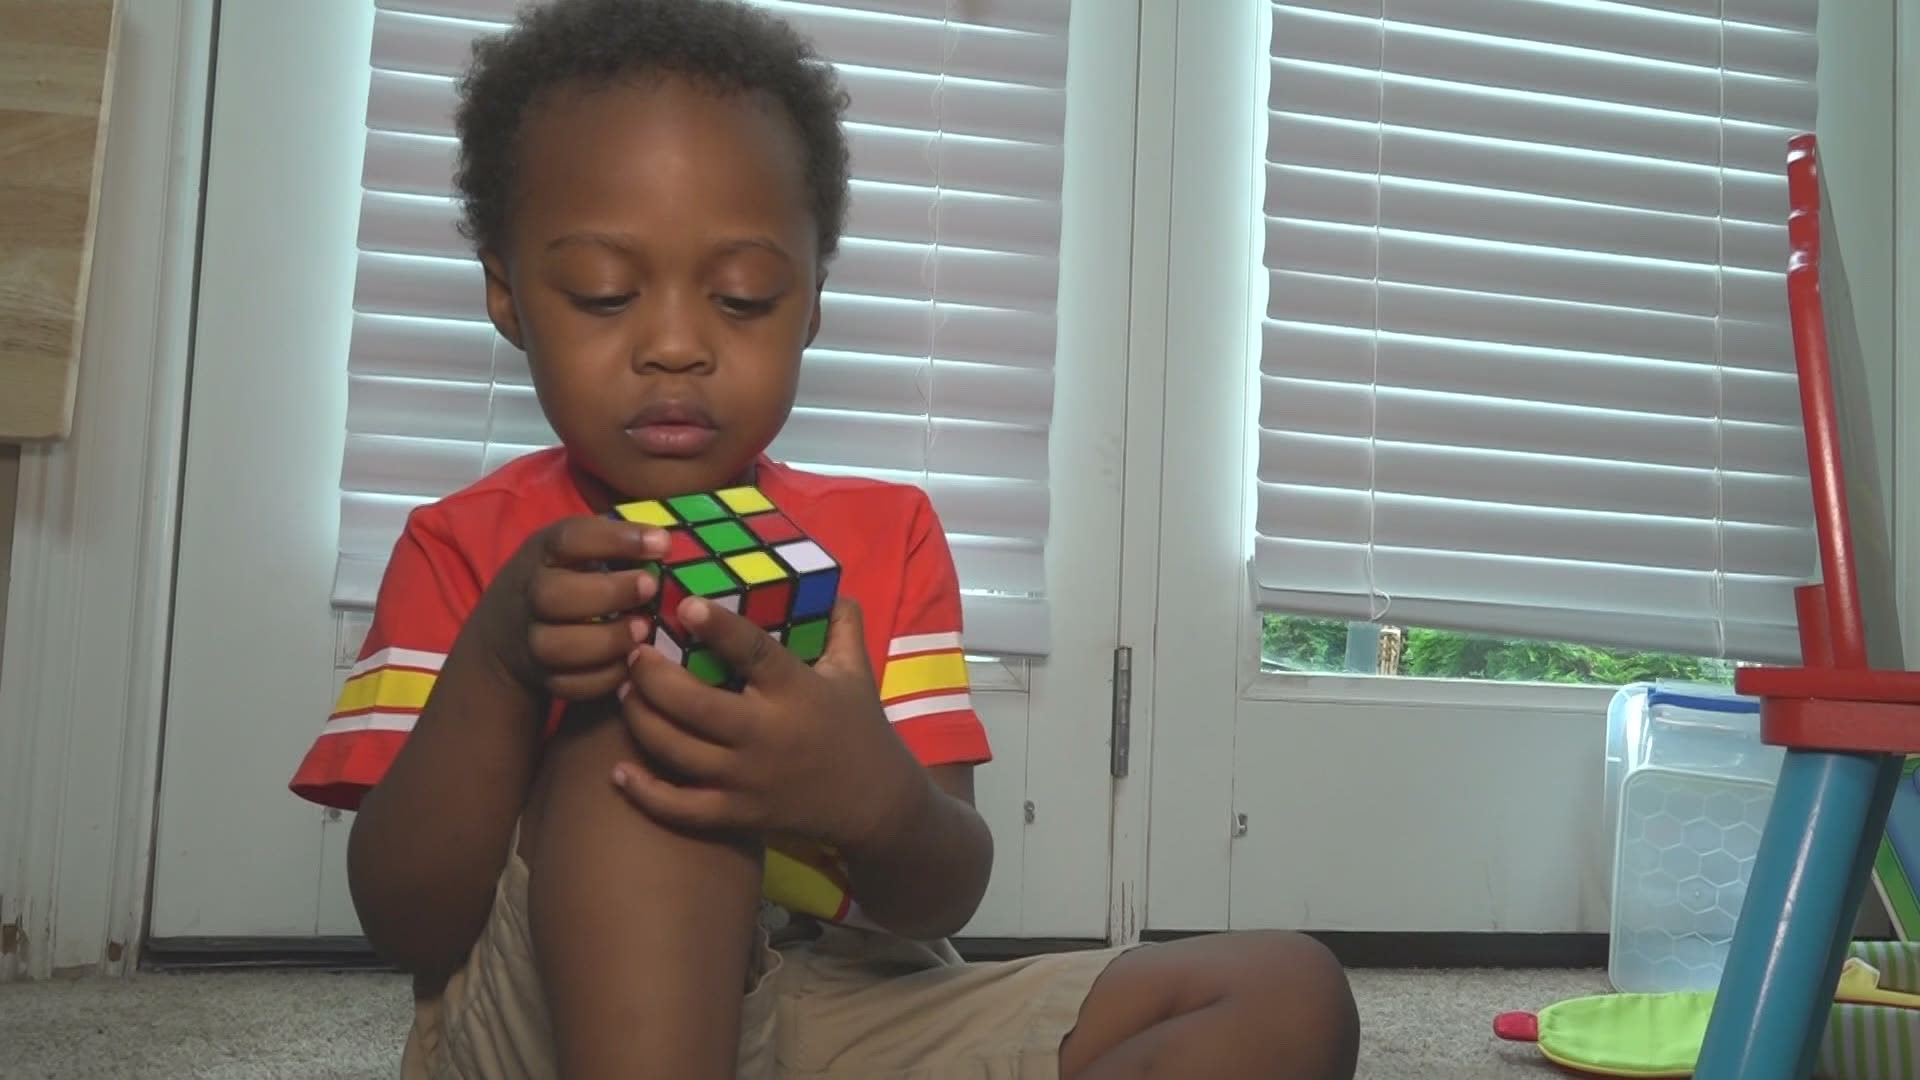 July 15, 2019: Meet 3-year-old Khalil Johnson -- aka boy genius. 'He knows his numbers 1-10 in English, Spanish and Arabic,' his mother, Khadijah says. Since he was a baby she knew he was special. But it was the day he solved the Rubik’s cube that landed him the viral attention. At first, he was just playing with the colors. Khalil's curiosity of the Rubik’s Cube was solved in two minutes.